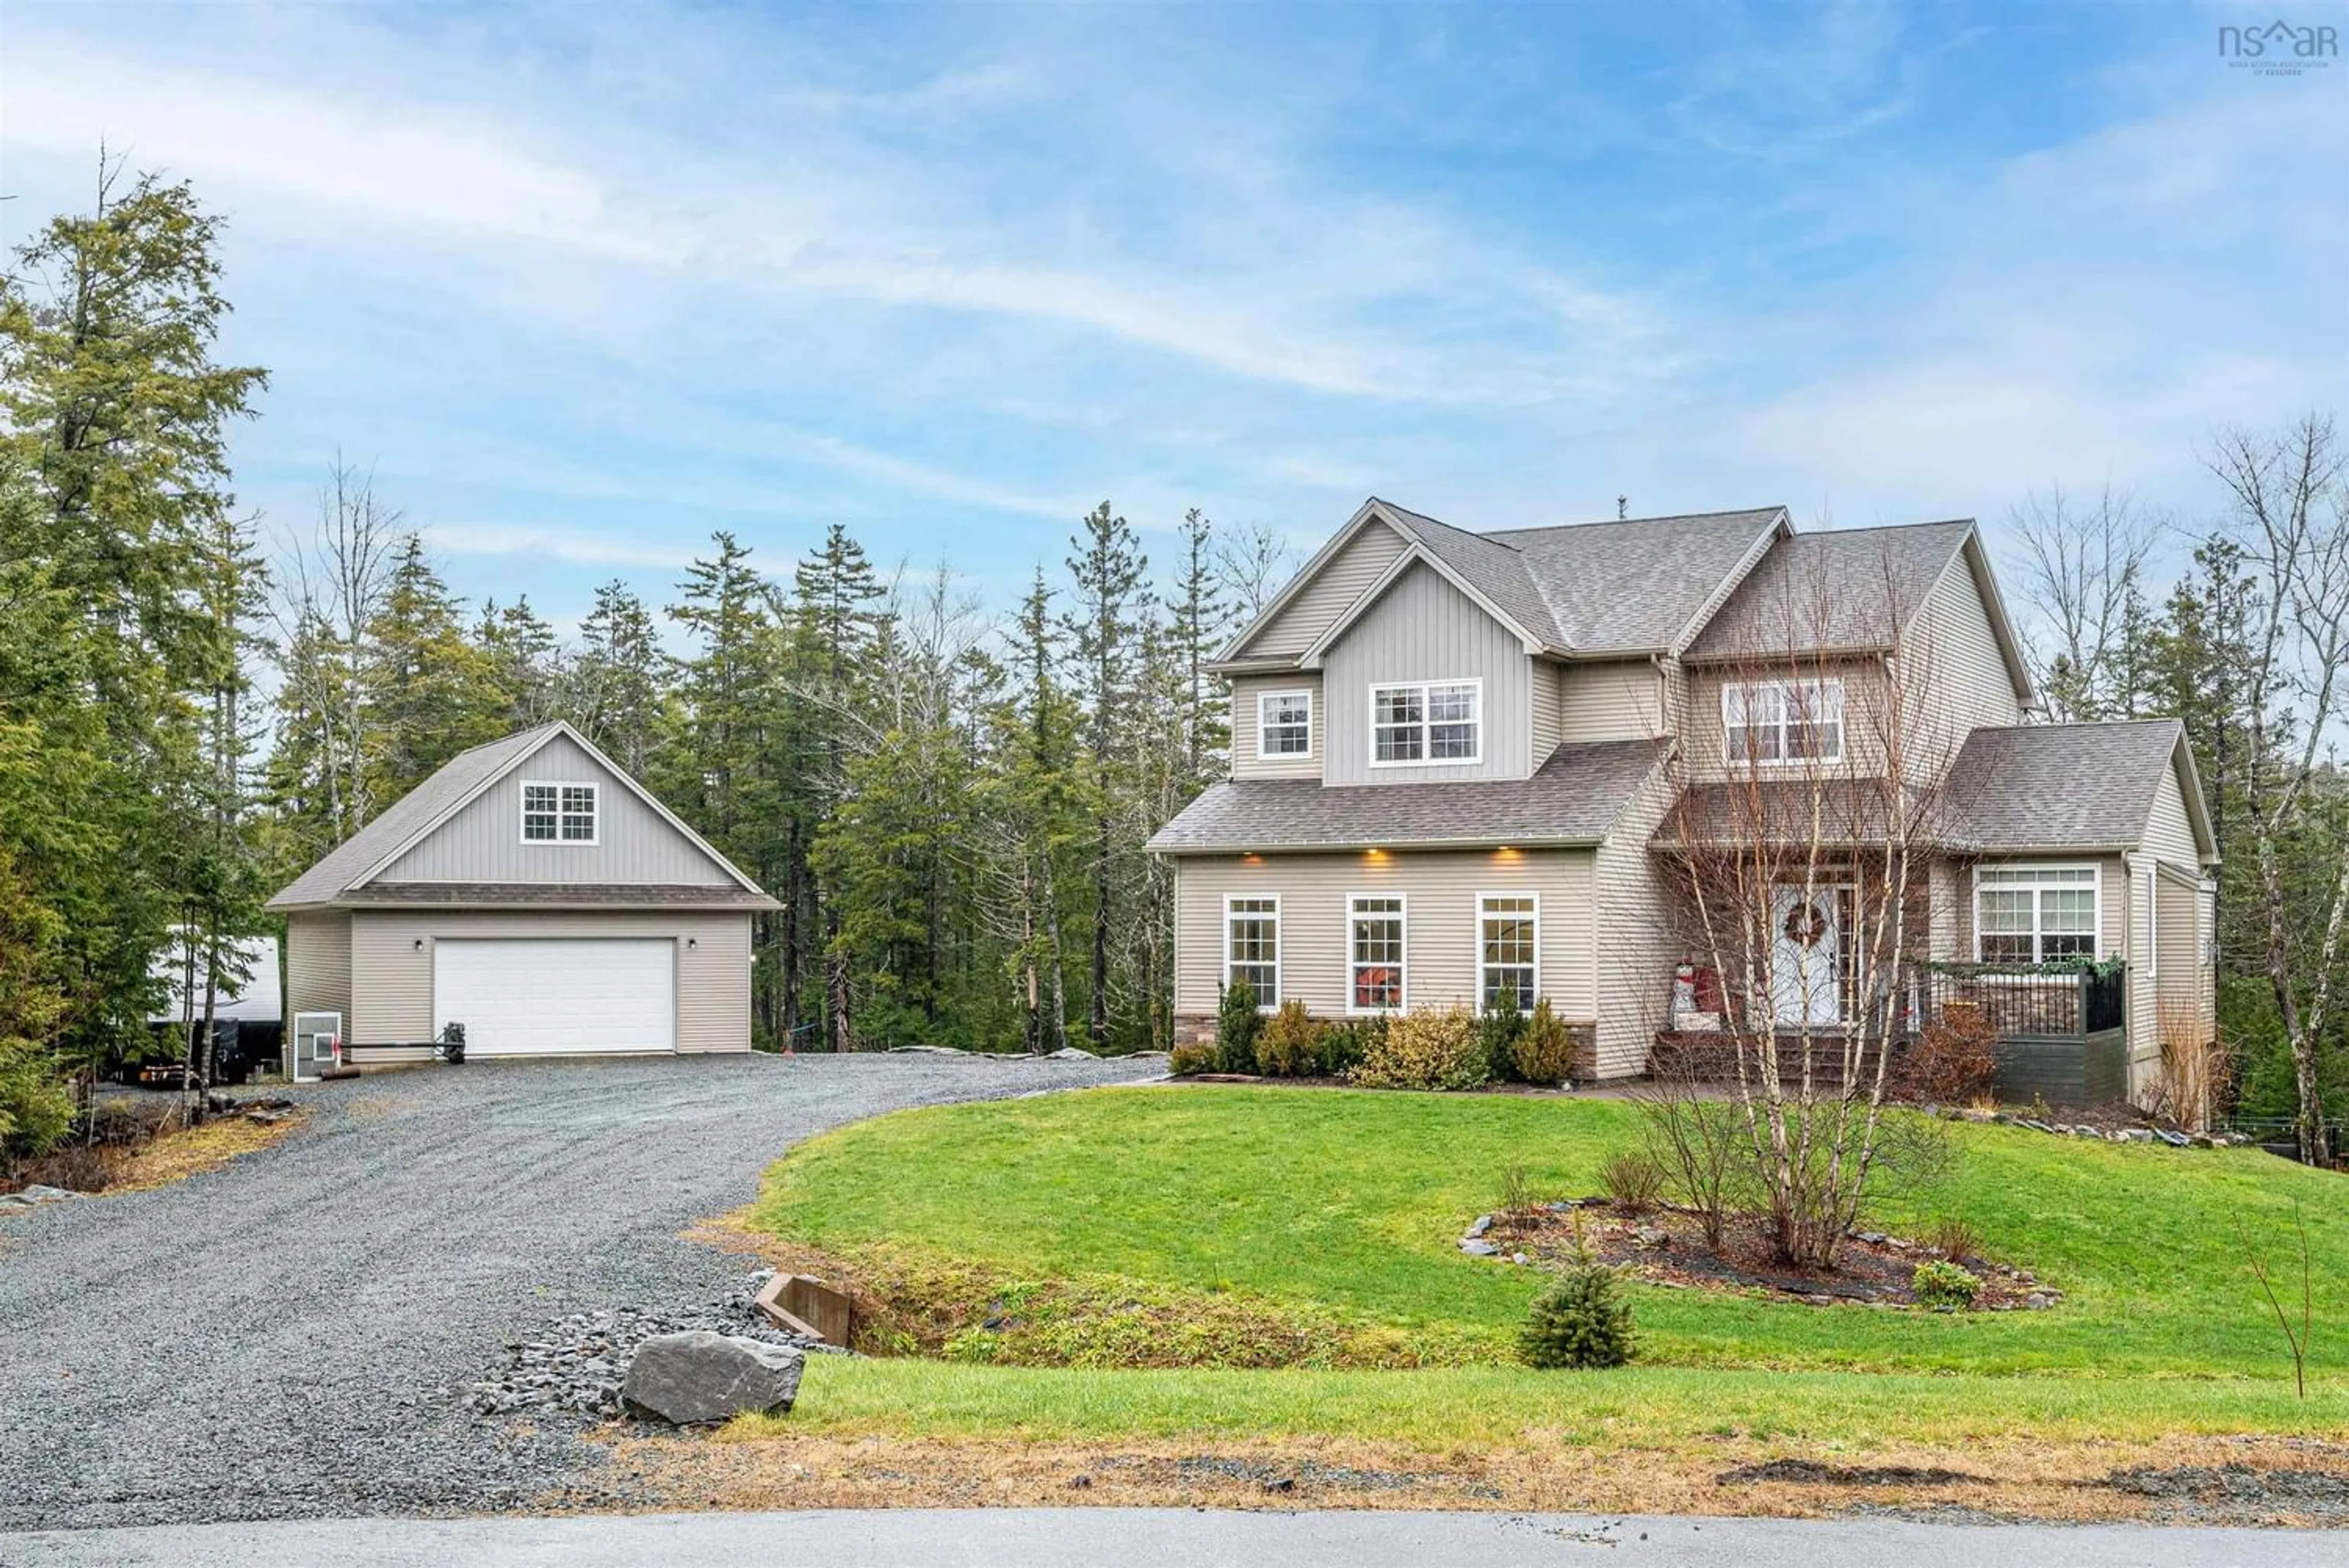 Home with stone exterior material for 339 Briancrest Rd, Windsor Junction Nova Scotia B2T 1Z9